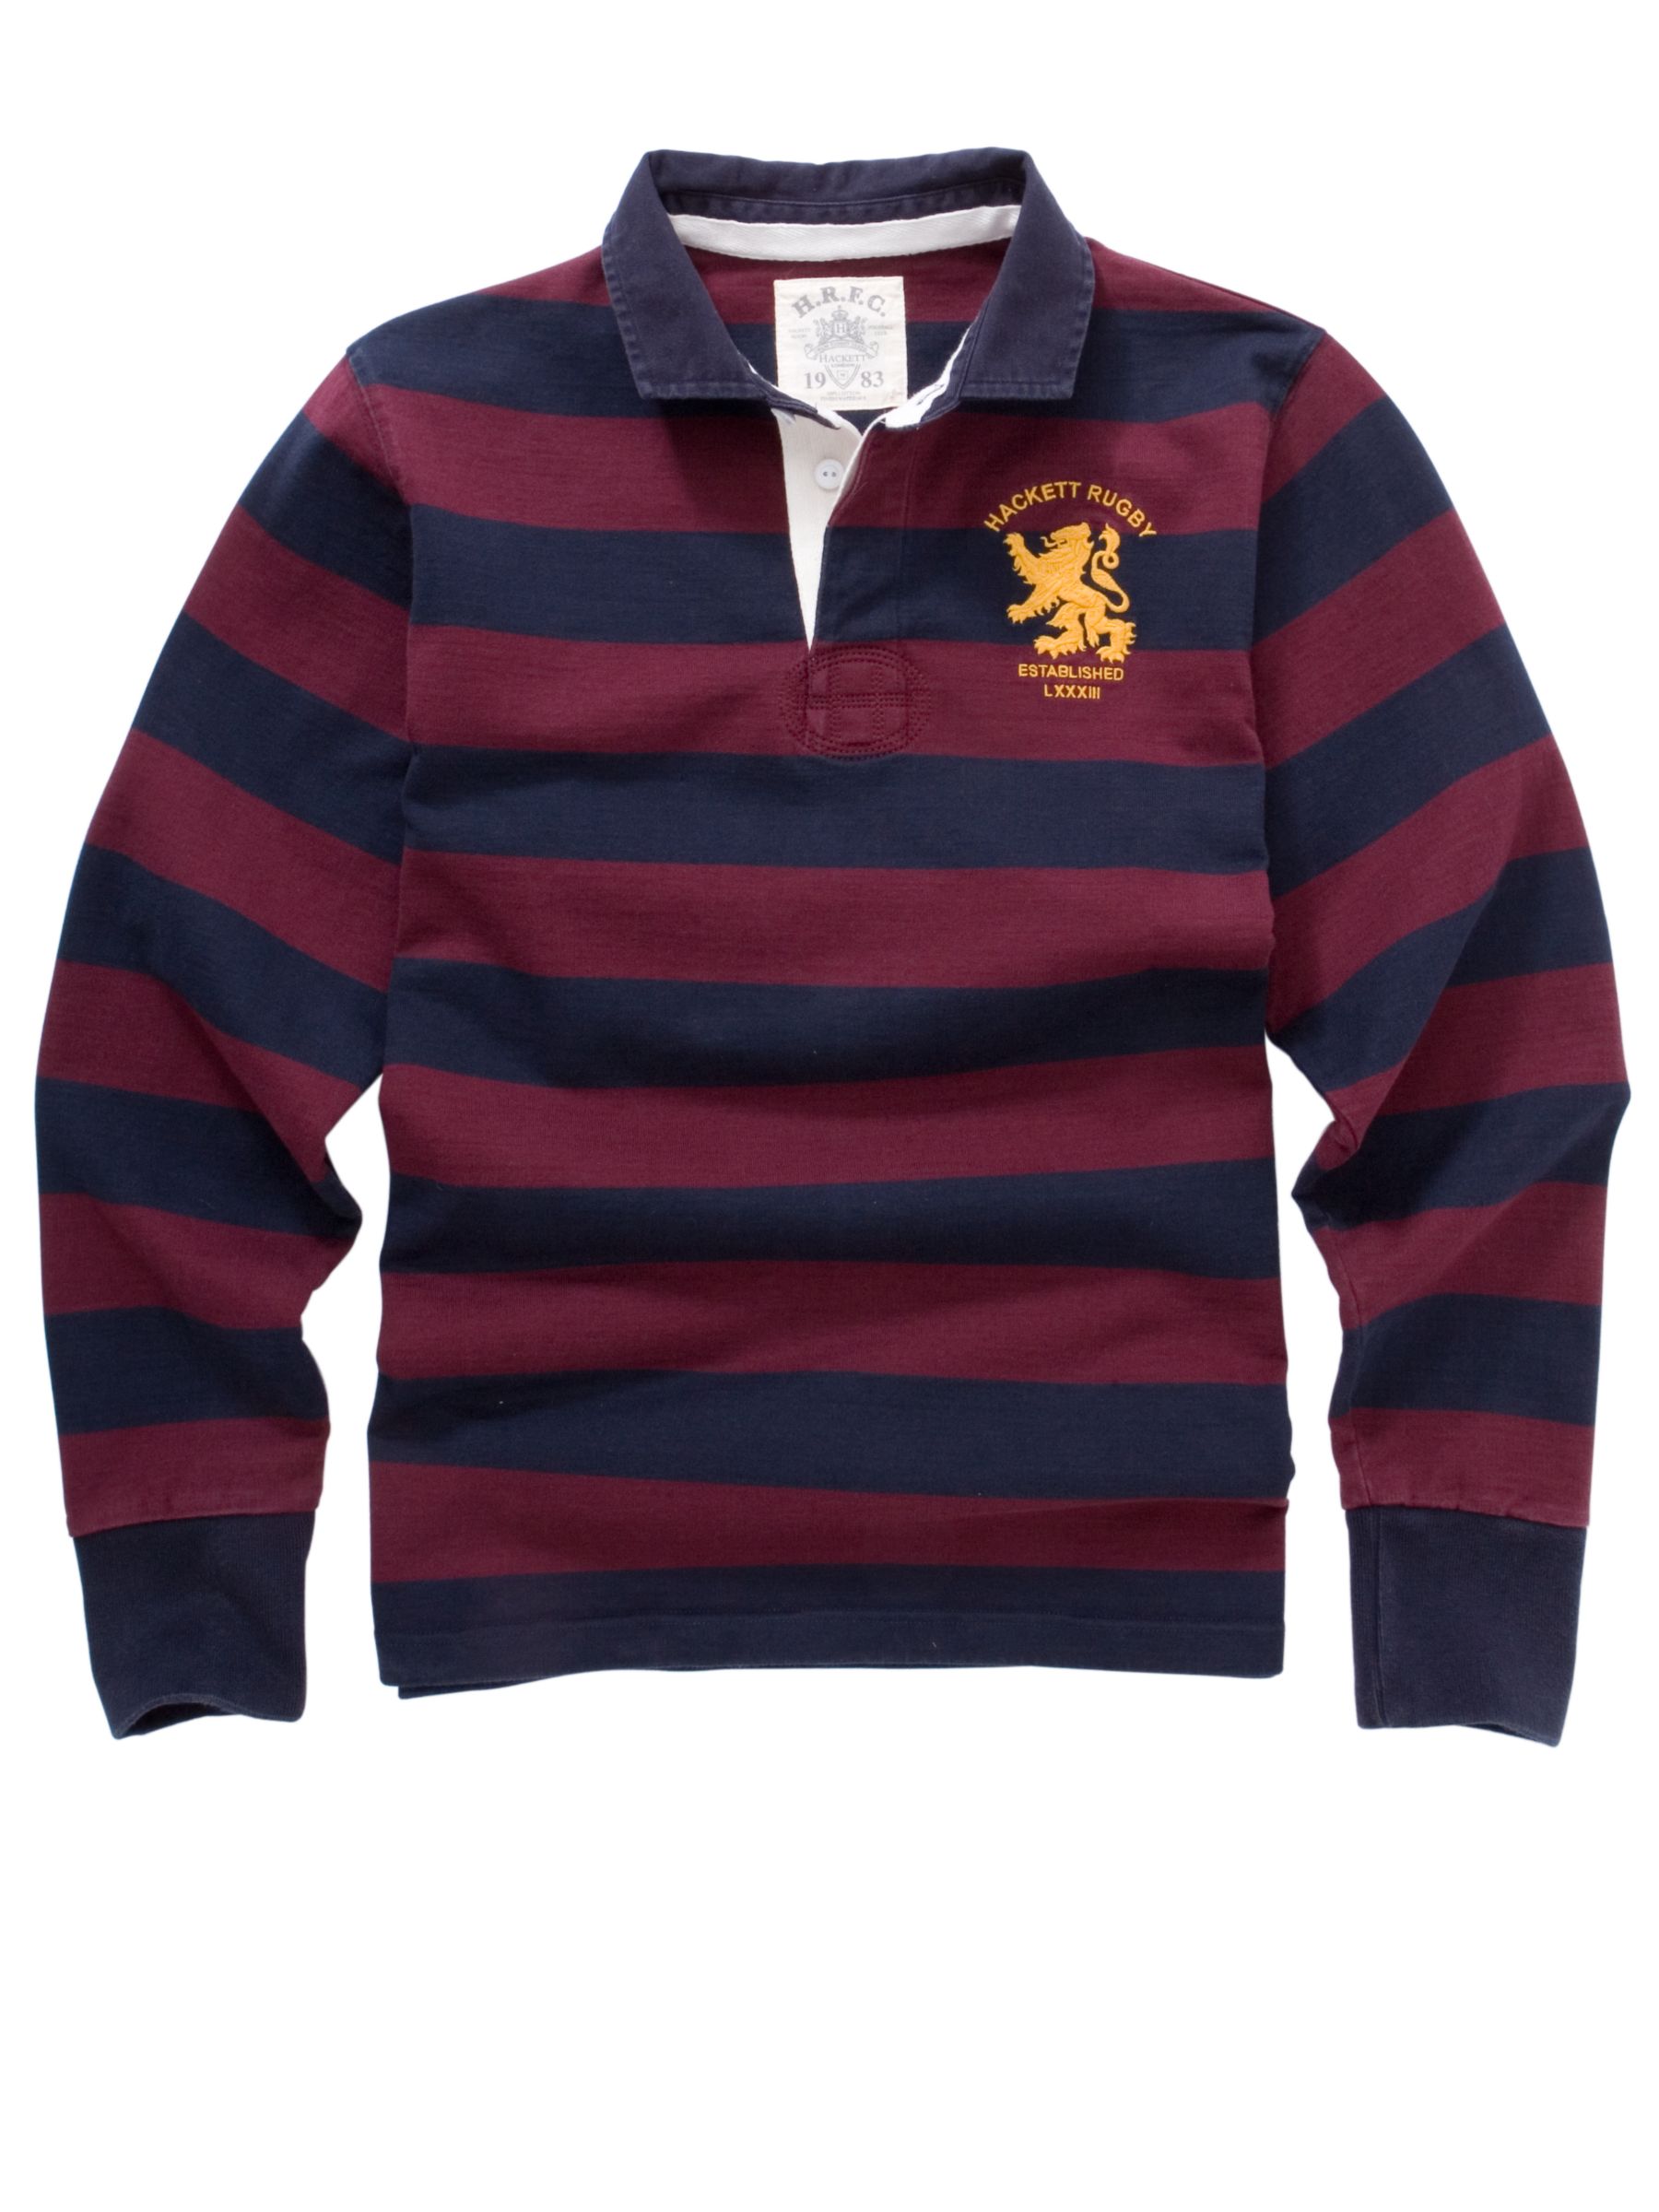 Hacket London Patch Rugby Shirt, Wine